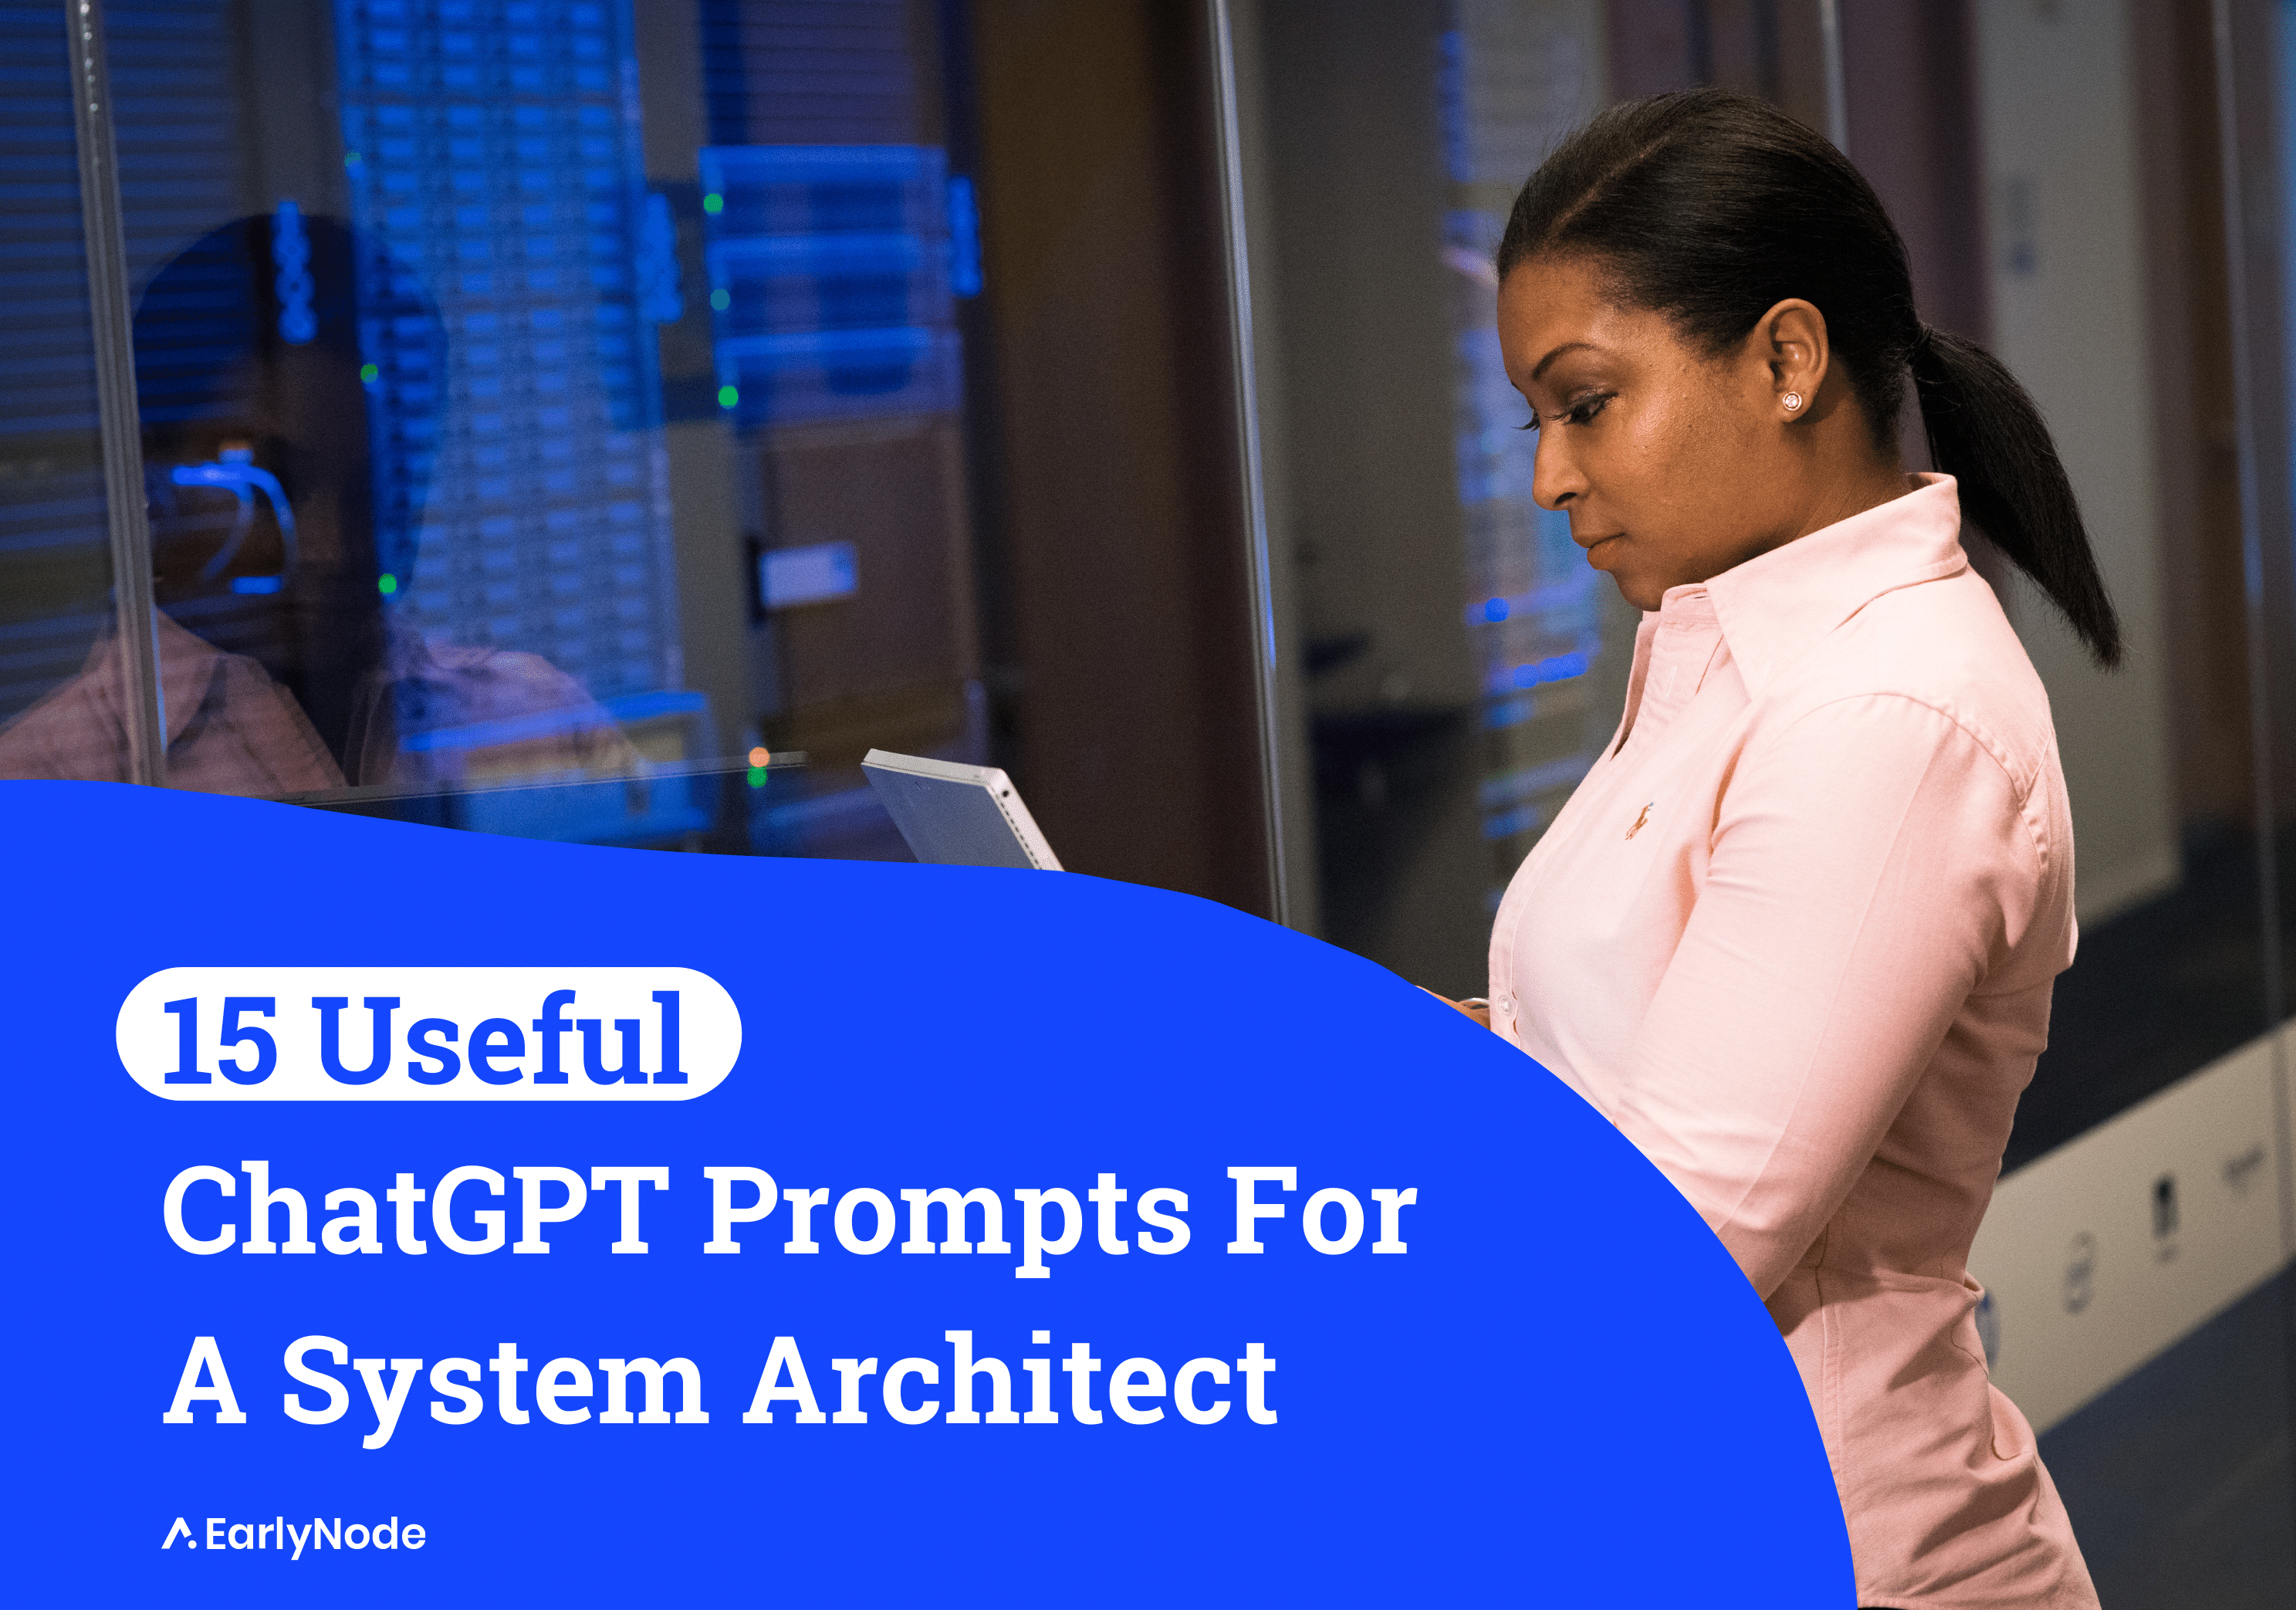 15 Incredibly Useful ChatGPT Prompts For System Architects